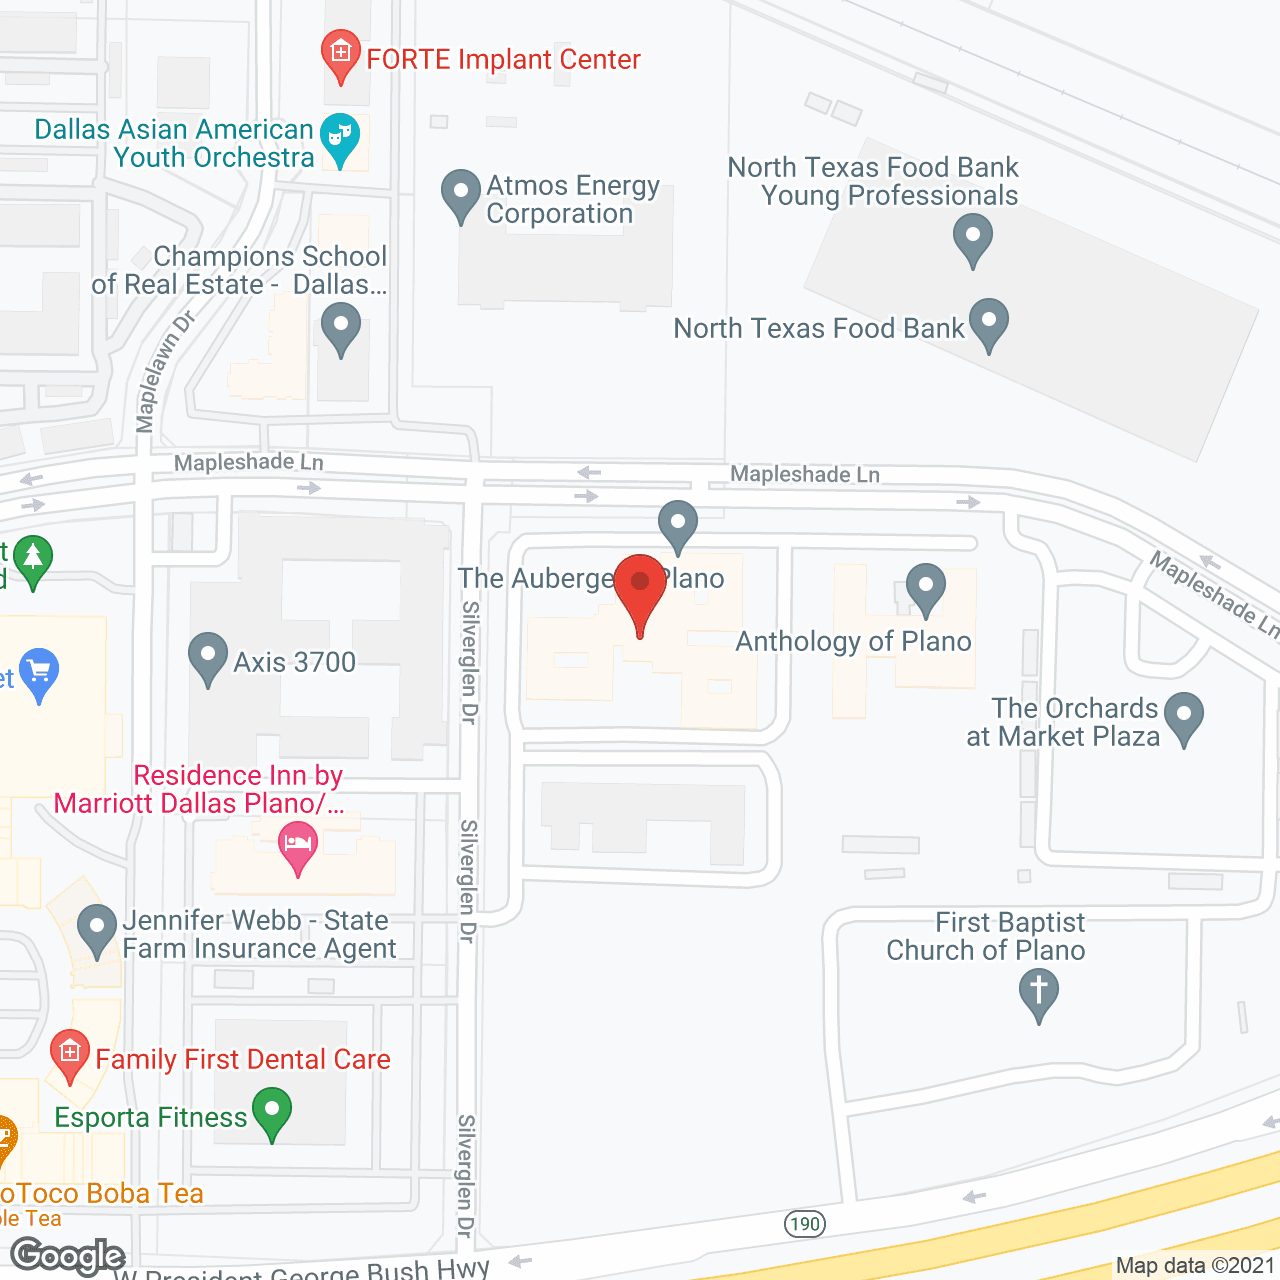 The Auberge at Plano in google map